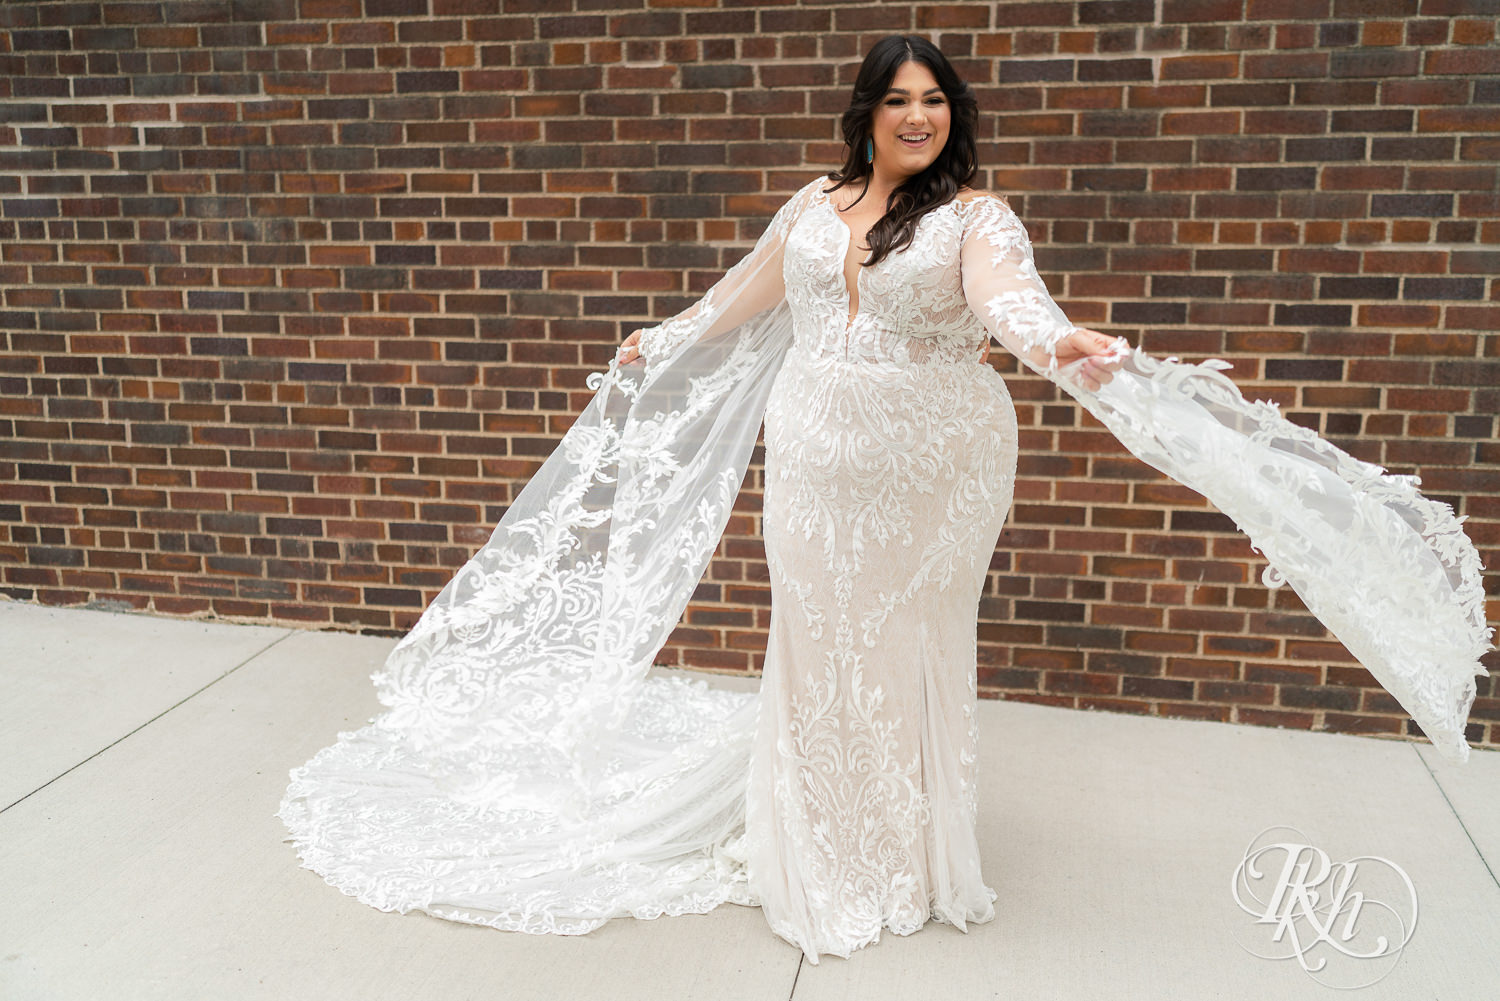 Plus size bride smiling and twirling wedding dress in Minneapolis, Minnesota.